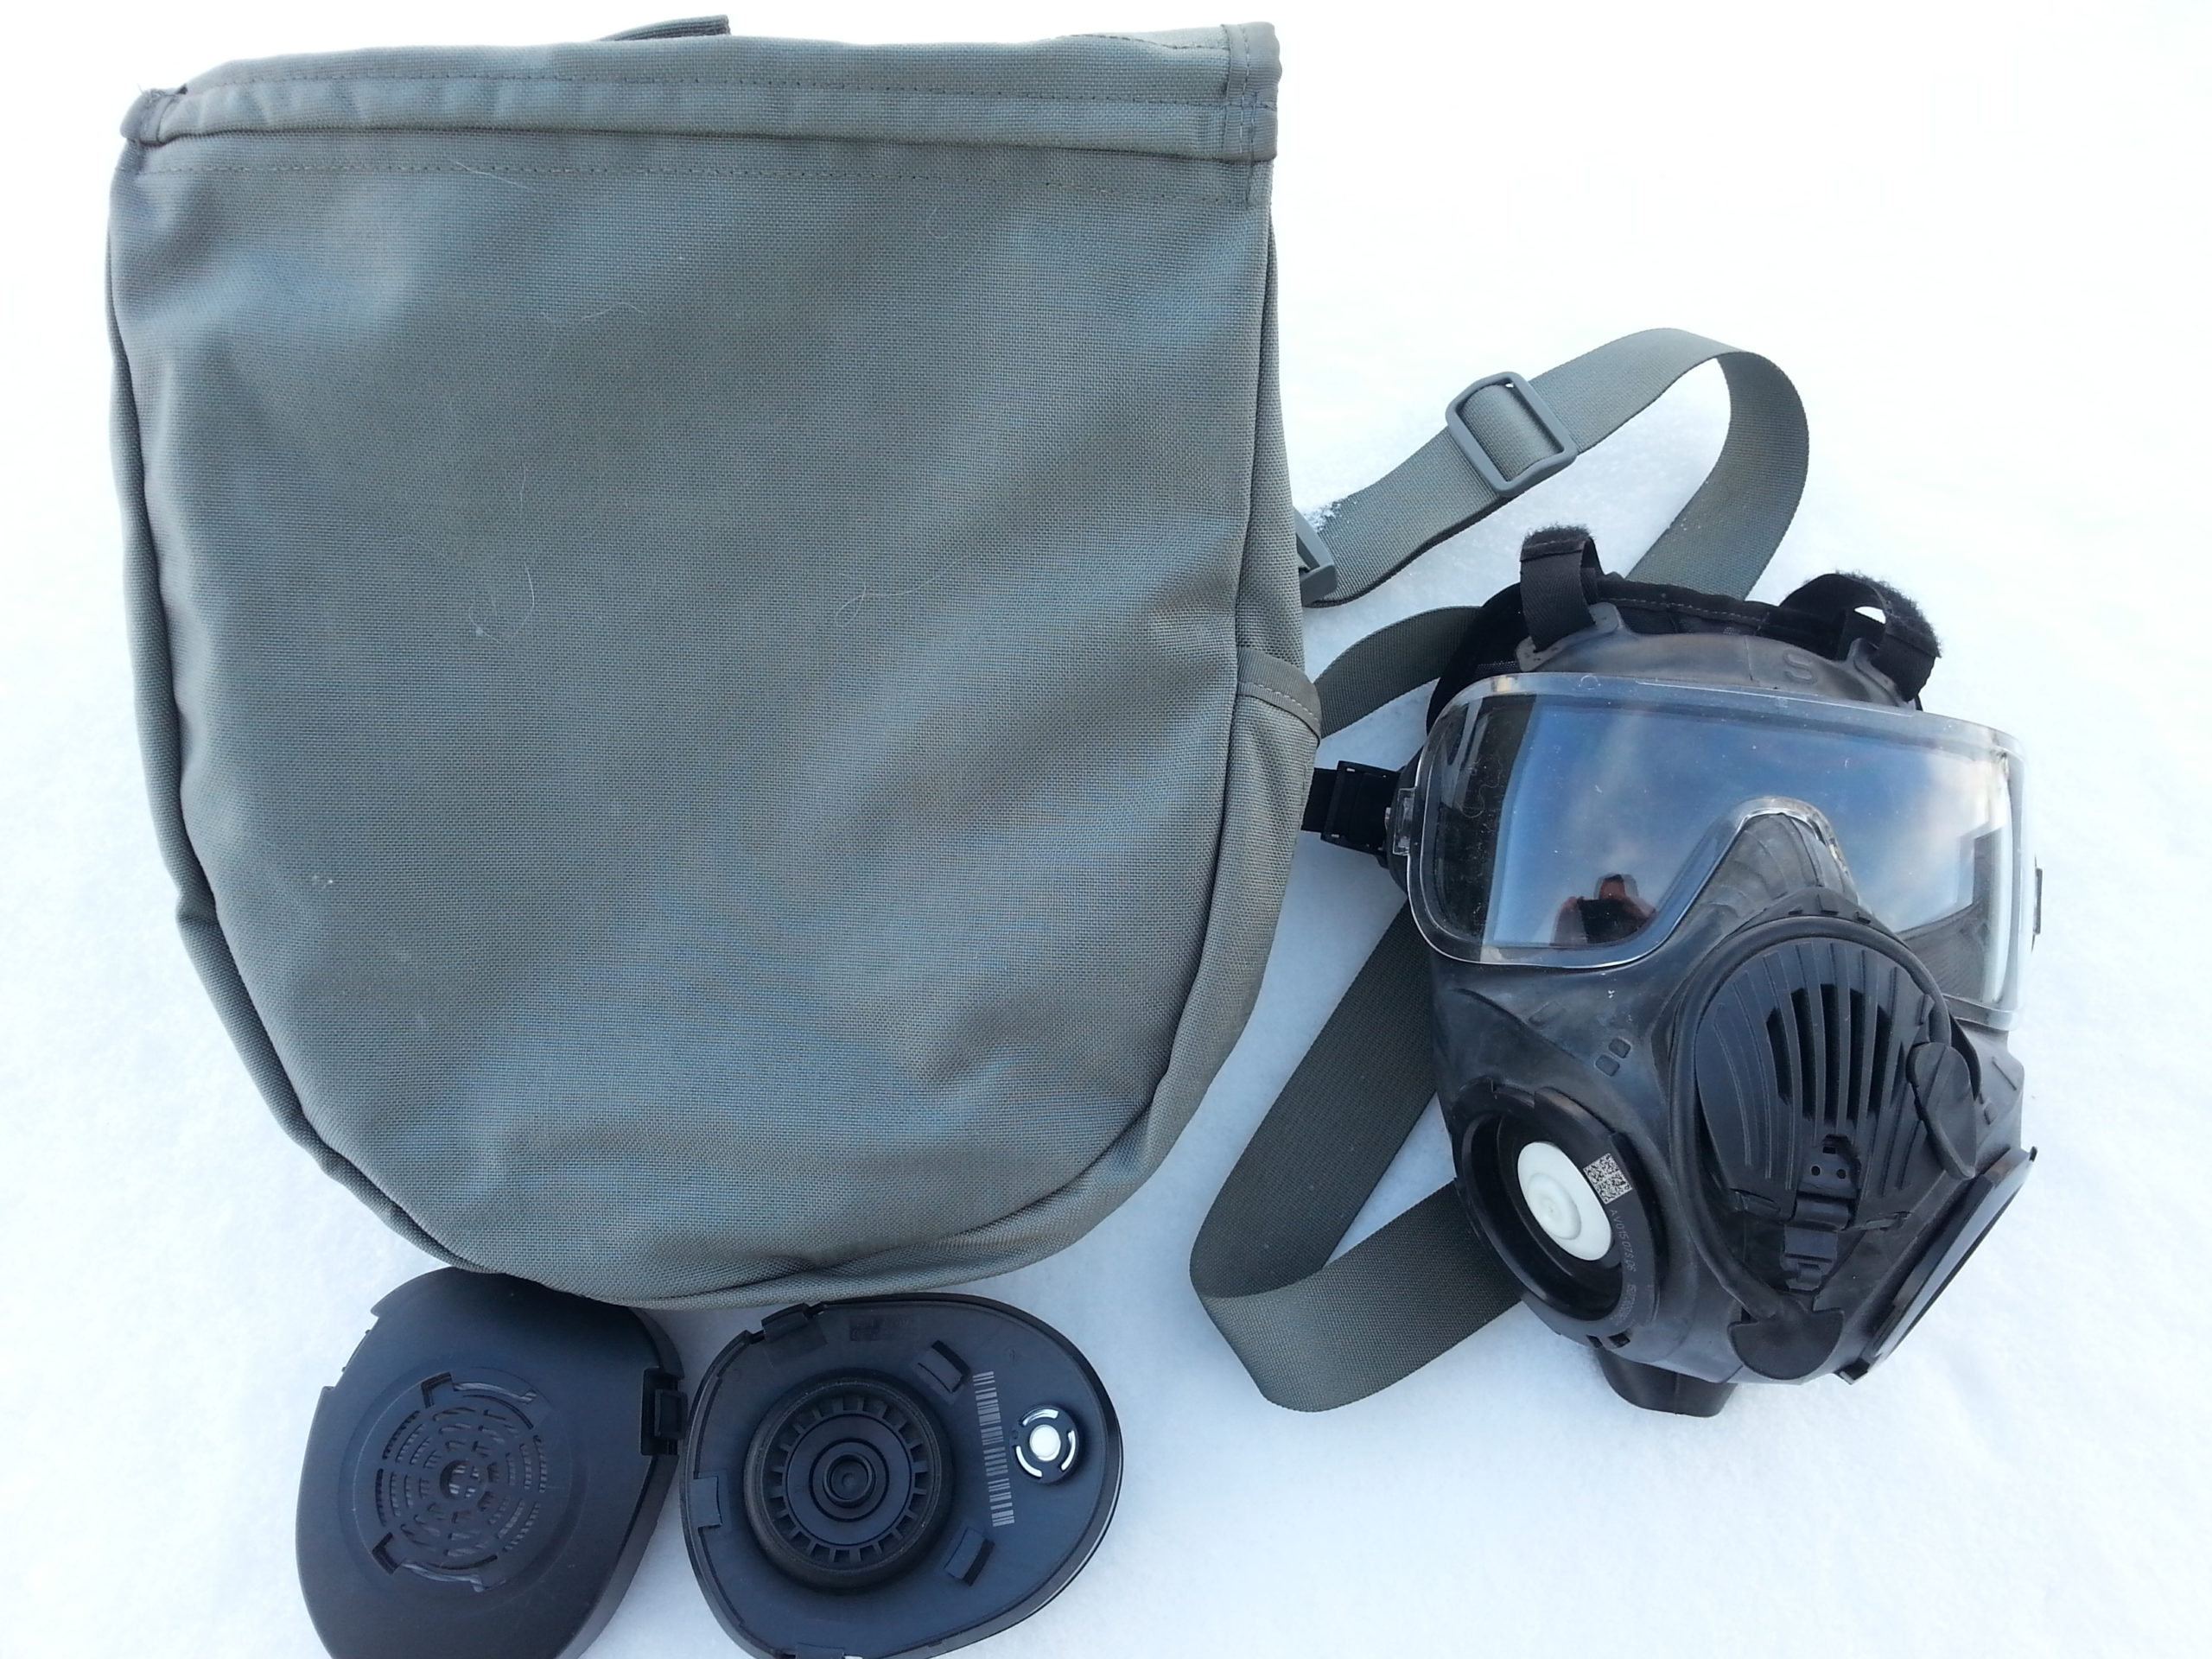 Avon M50 gas mask with filters and carry bag